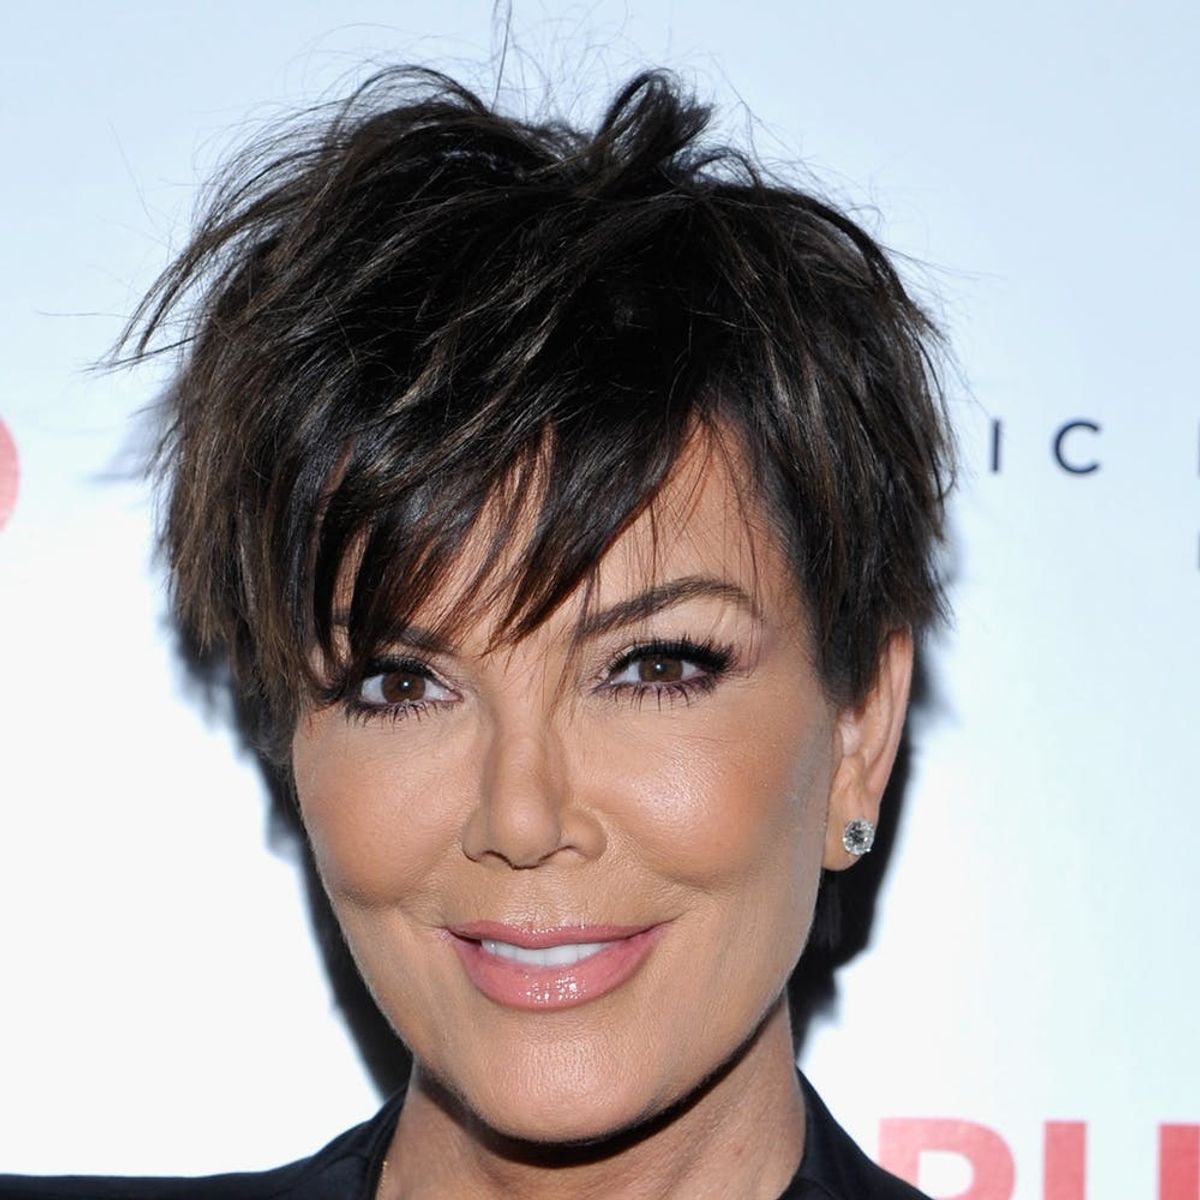 Kris Jenner Just Stepped Out As a Blonde and We Hardly Recognized Her